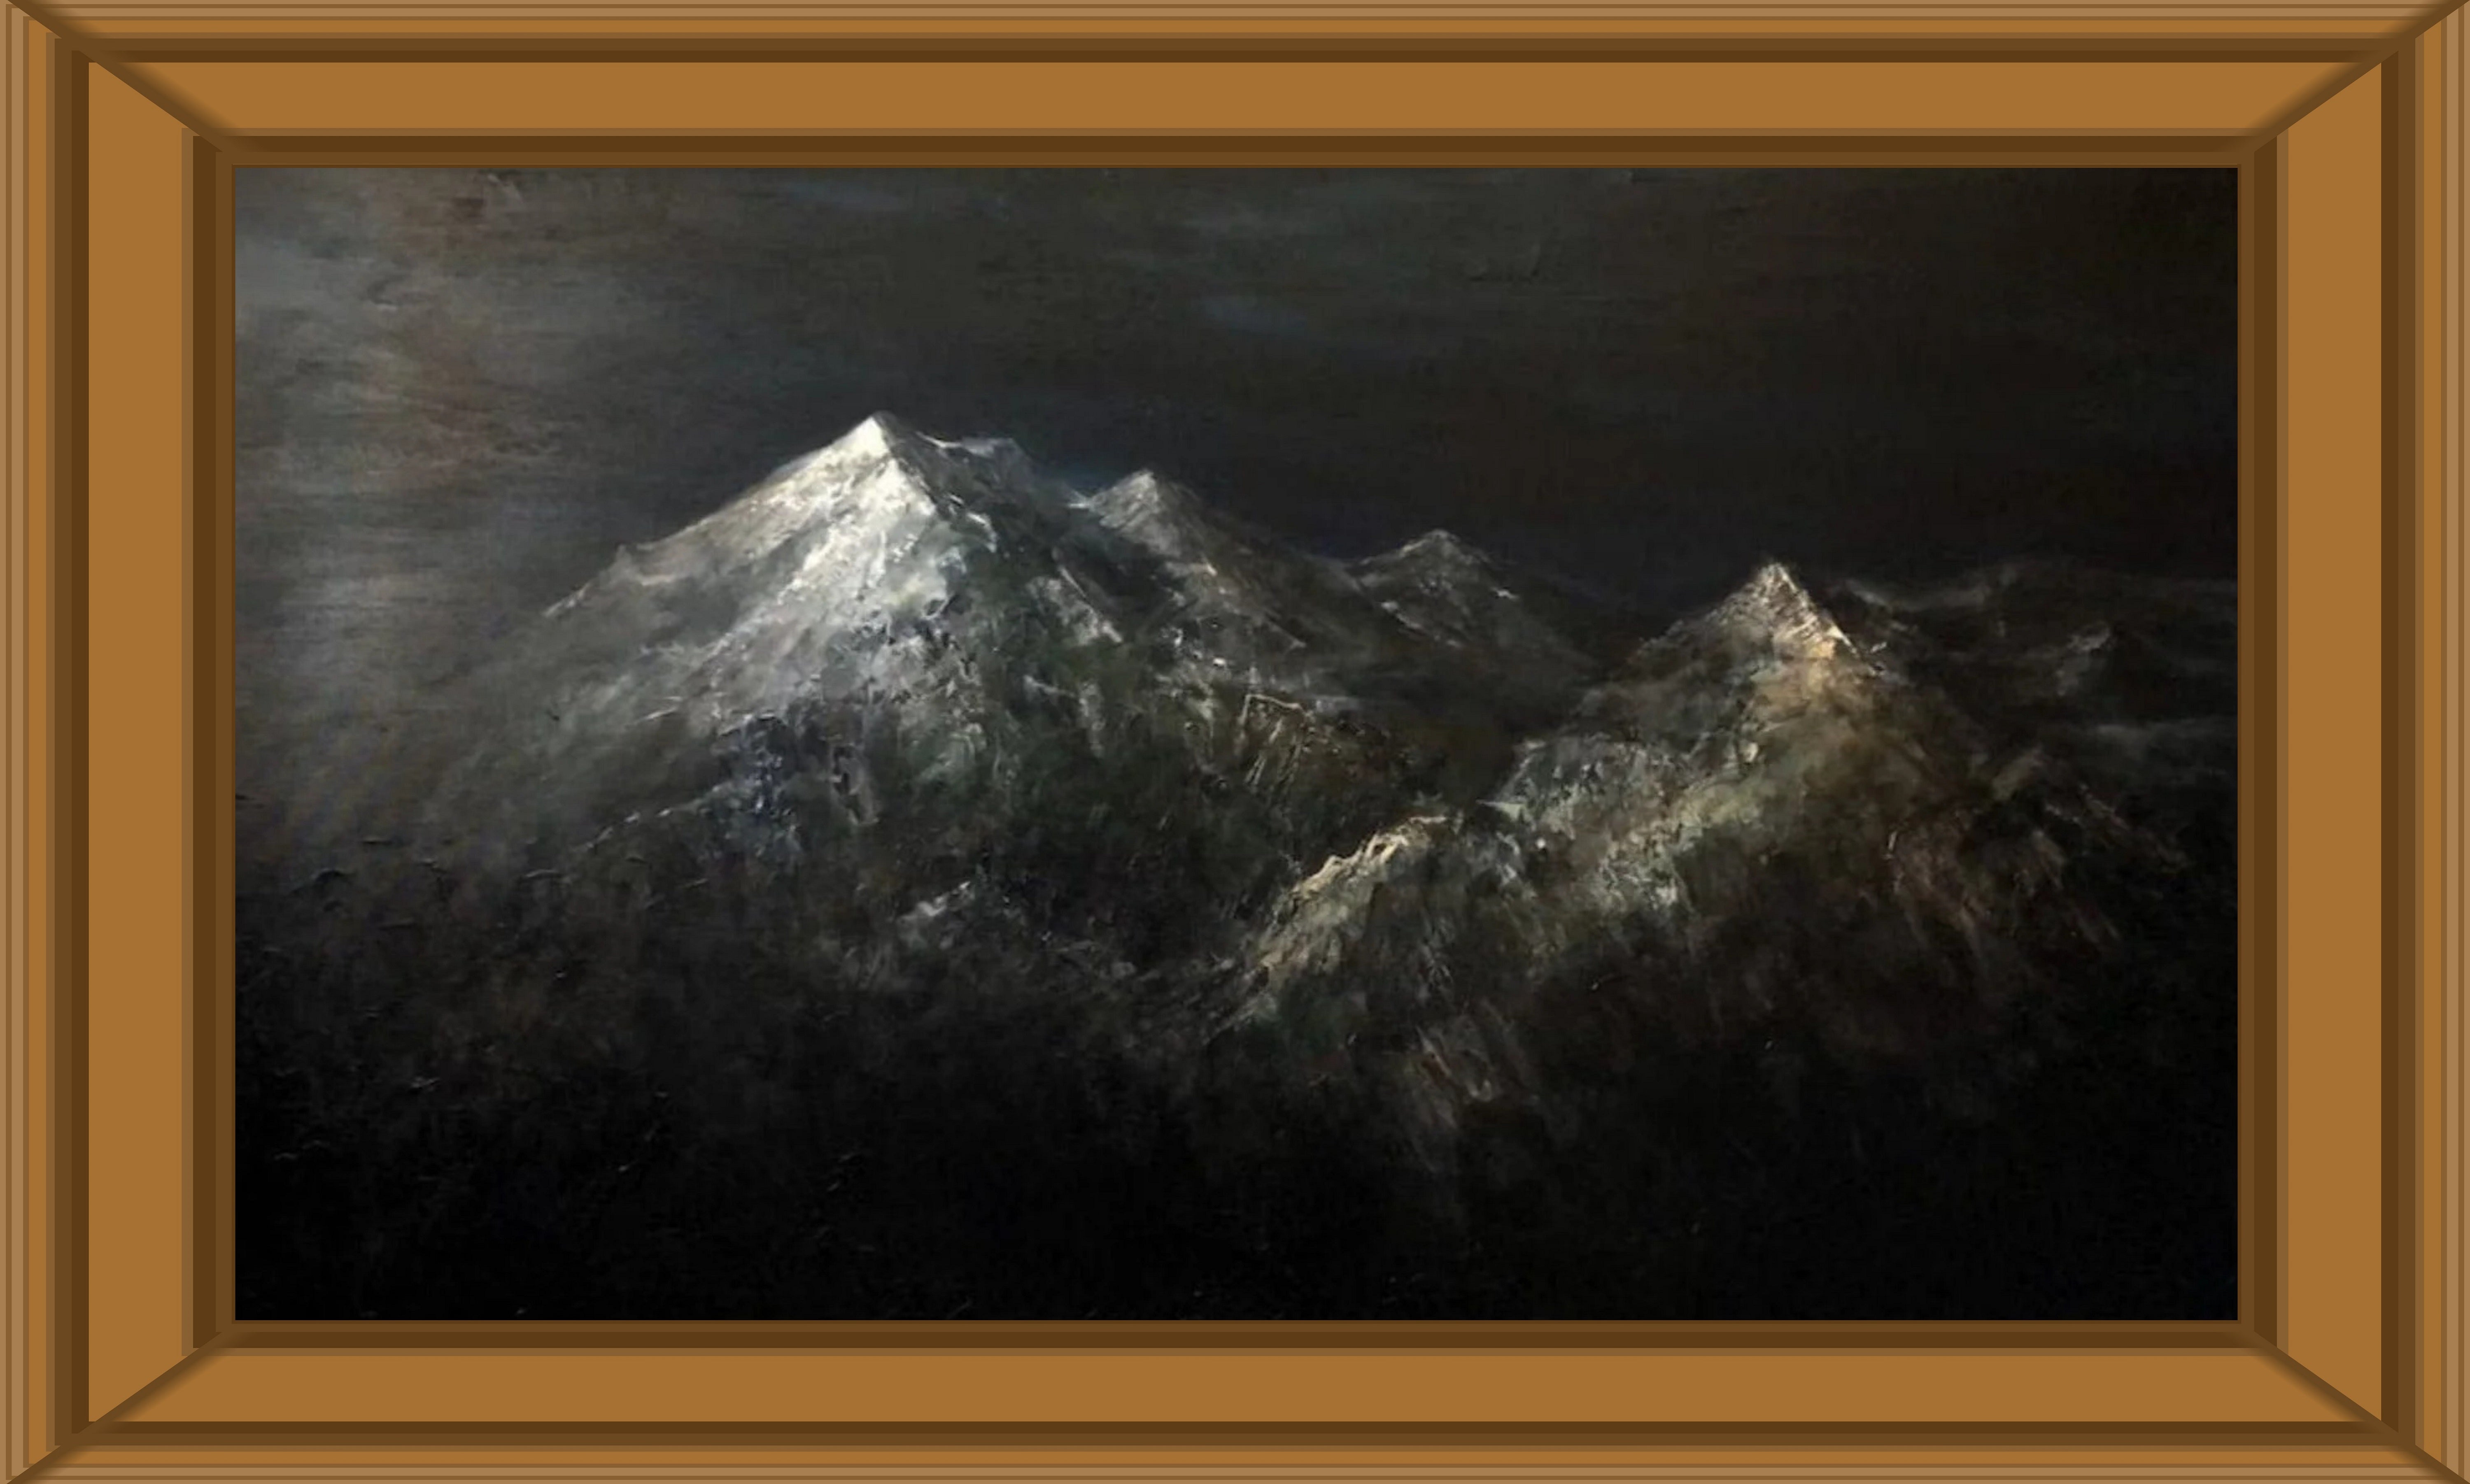 Abstract Mountains Painting Large Painting On Canvas Original Landscap